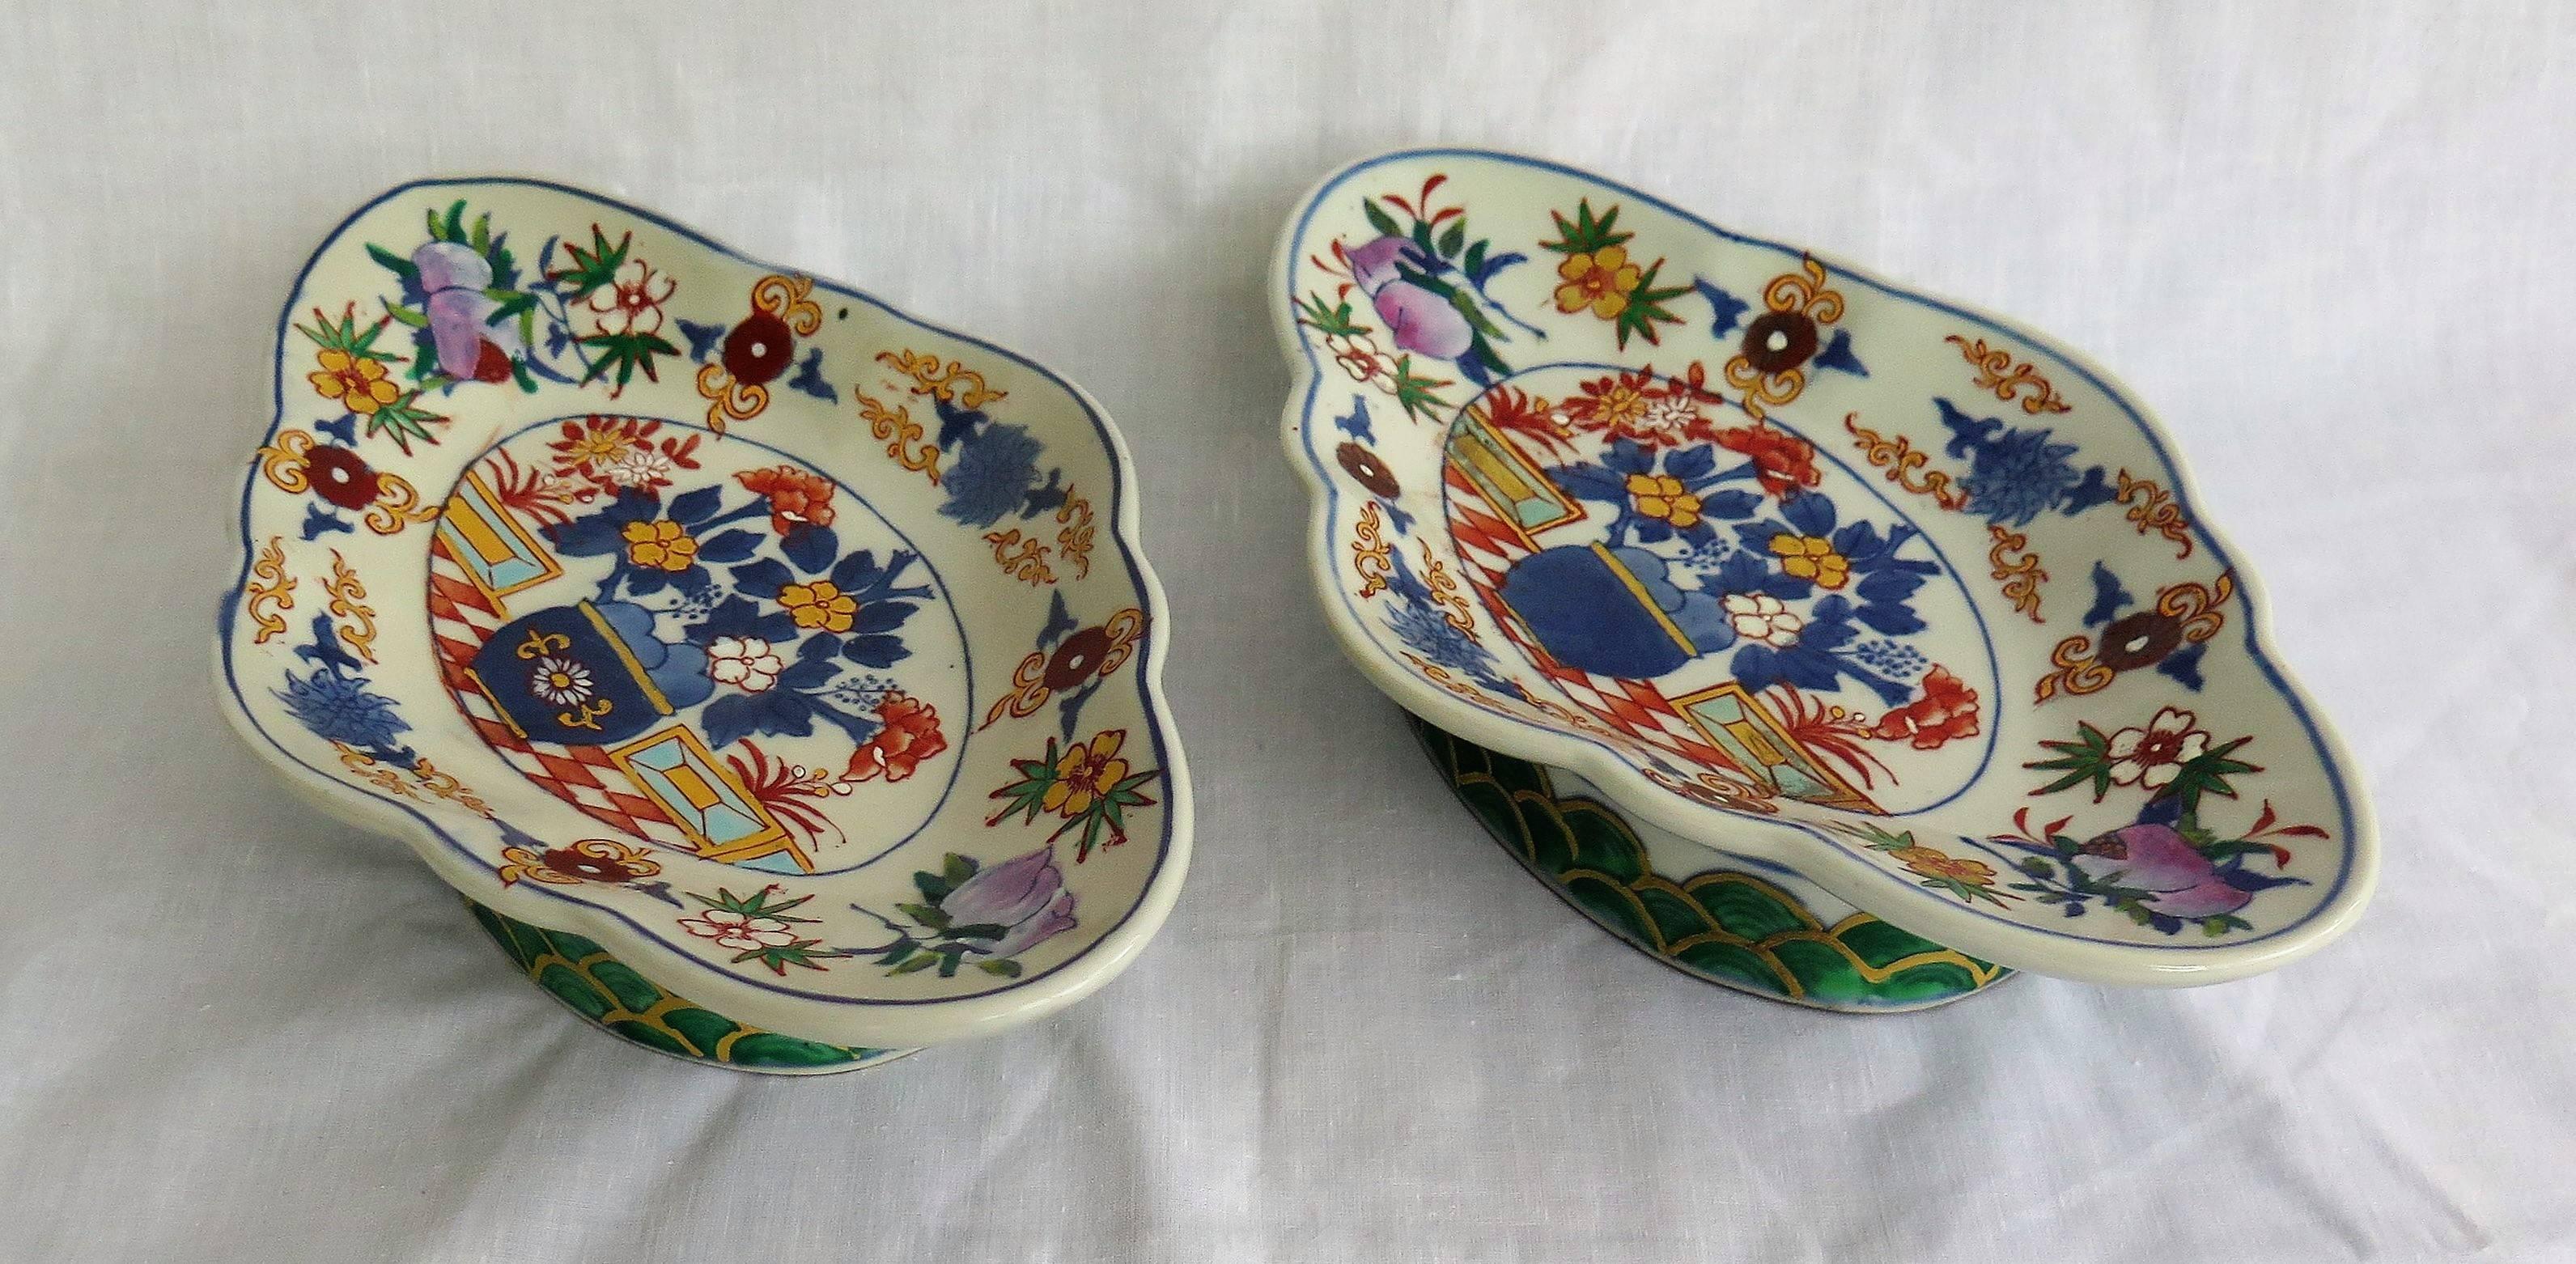 19th Century Pair of Bowls, Chinese Export, Hand Painted Porcelain, Late Qing, C.1900